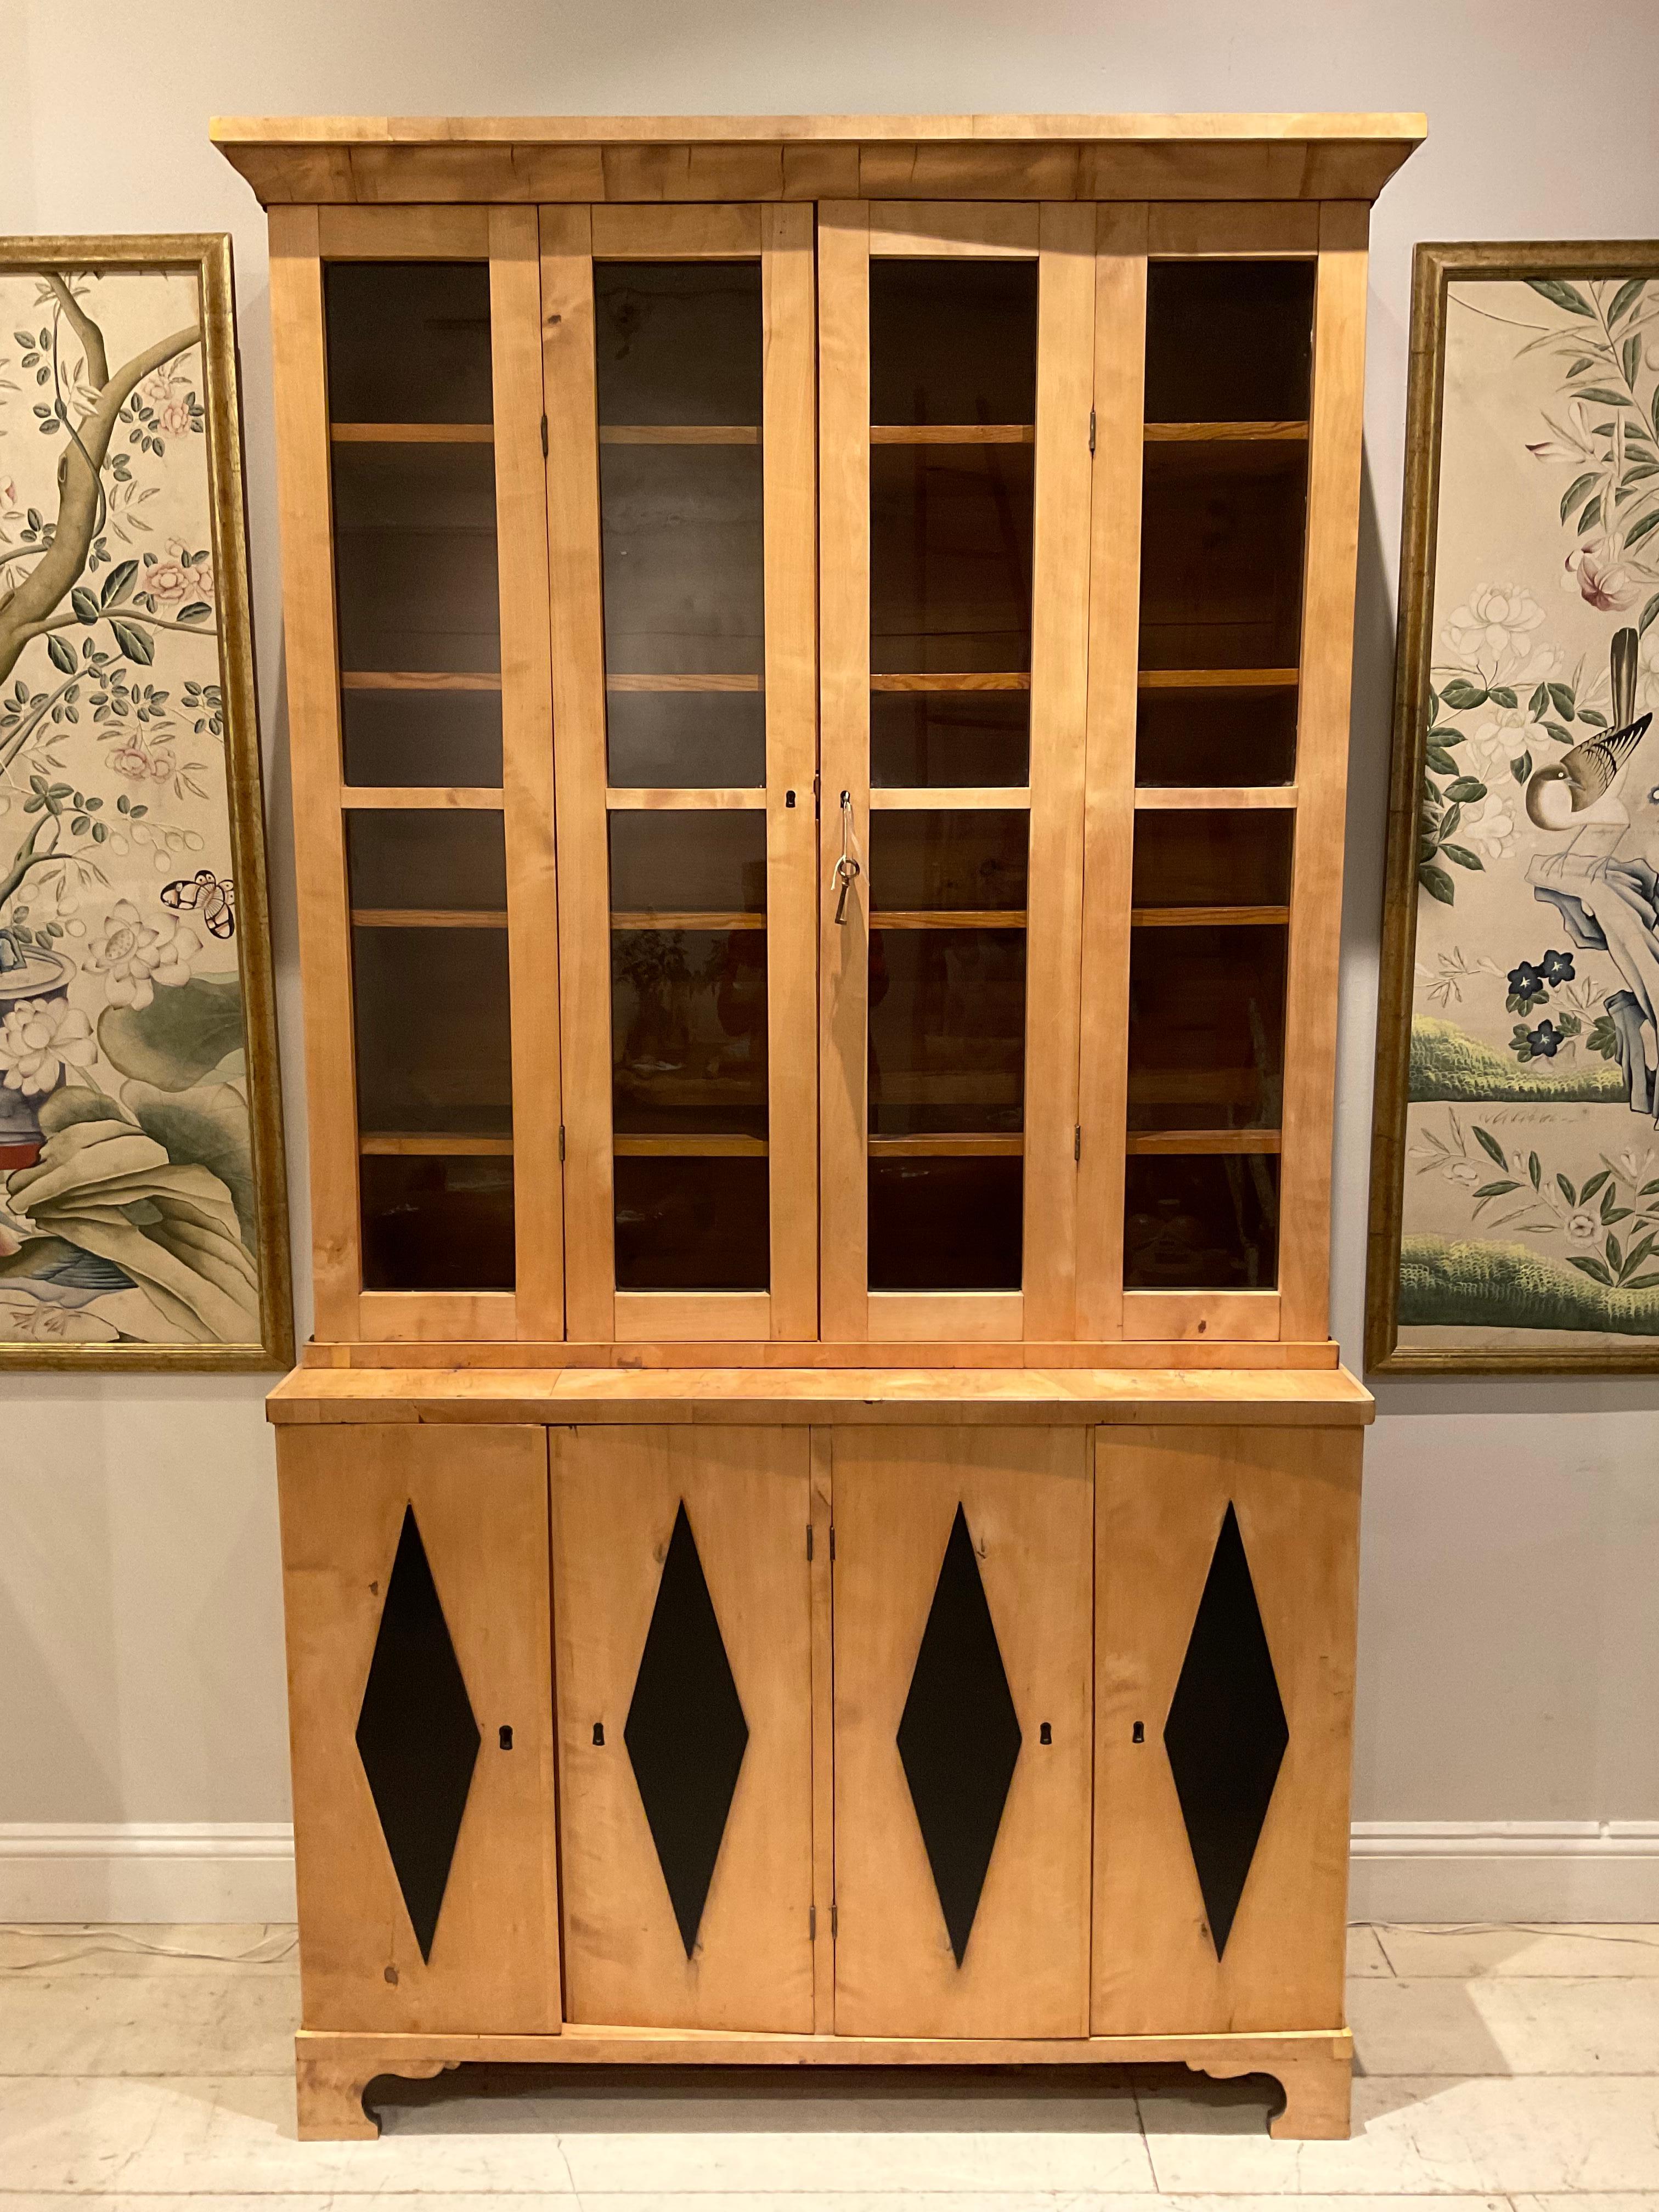 Neoclassical C19th Bookcase from Sweden with glazed top and decorative diamond detail to base